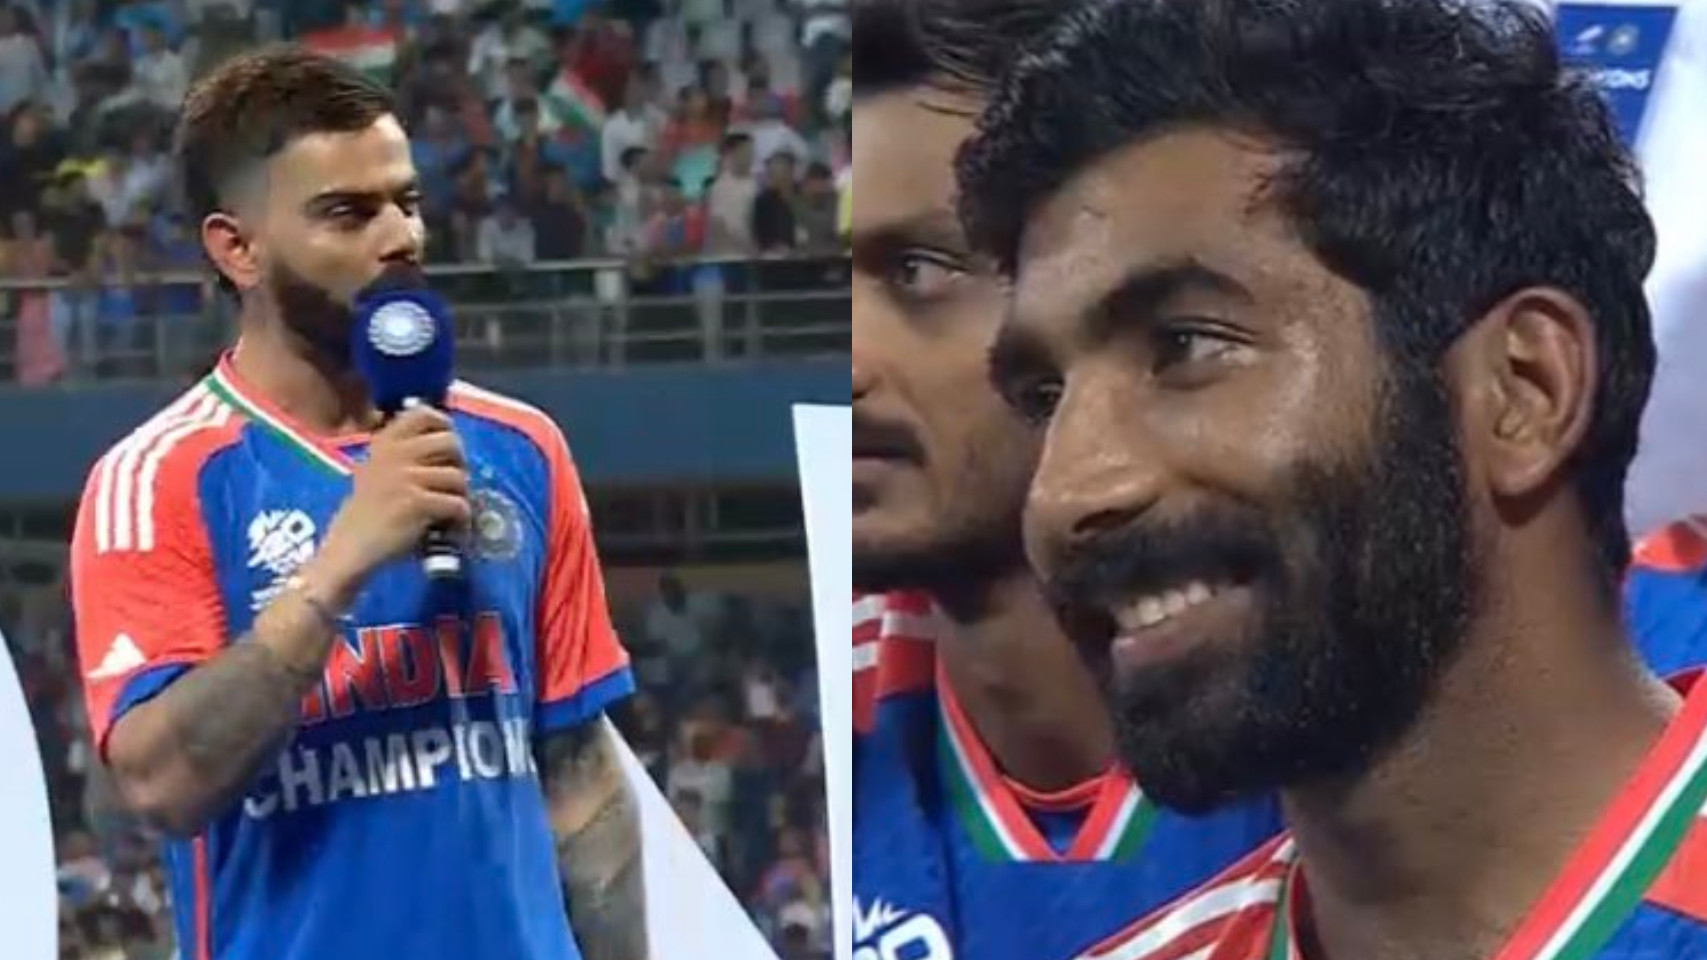 WATCH- Virat Kohli credits Jasprit Bumrah for India's win; says will sign petition to declare pacer as national treasure